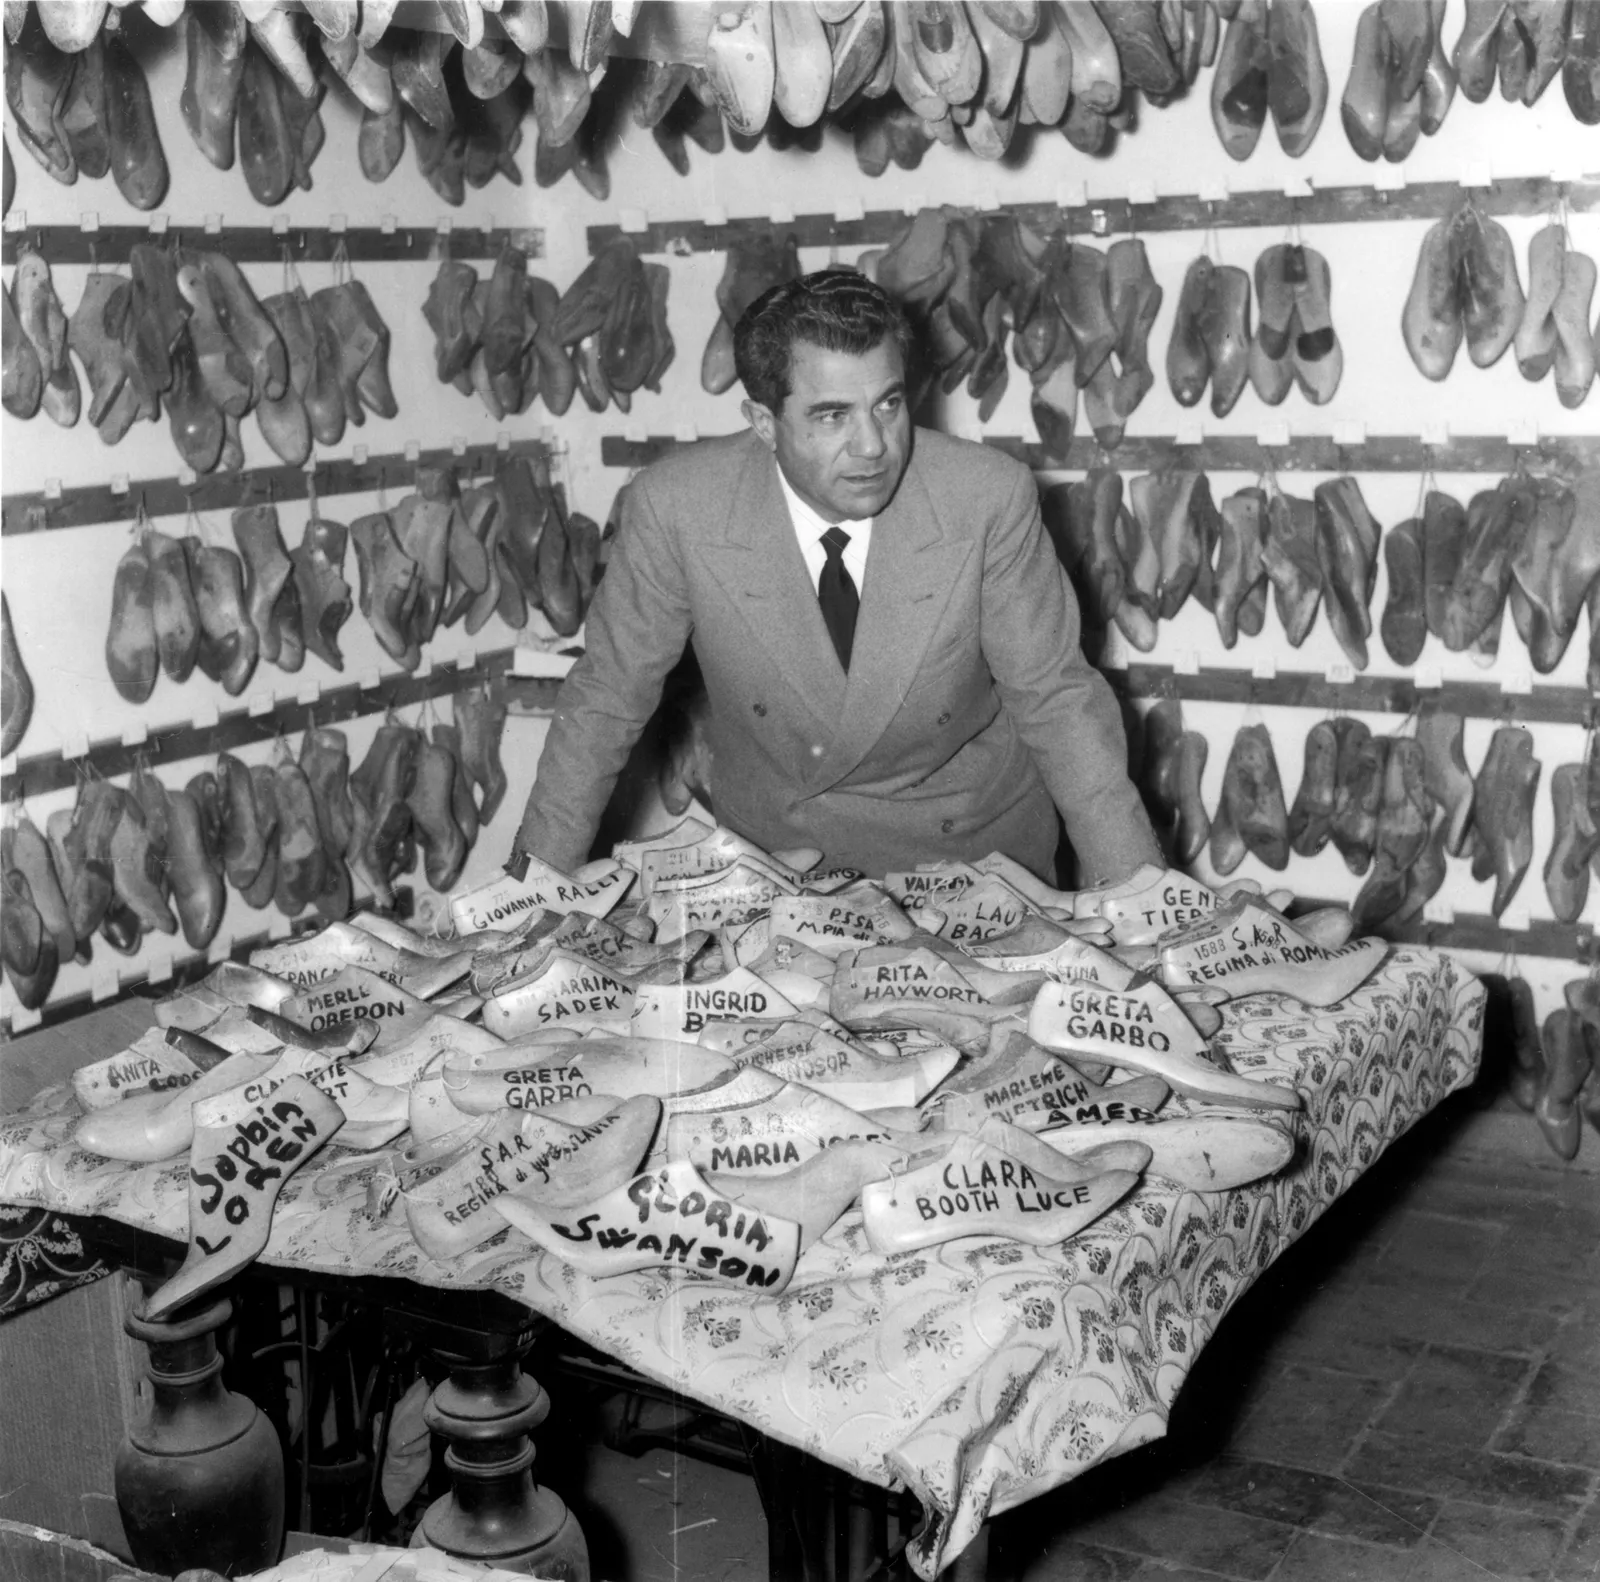 Salvatore Ferragamo and wooden shoe moulds of the famous